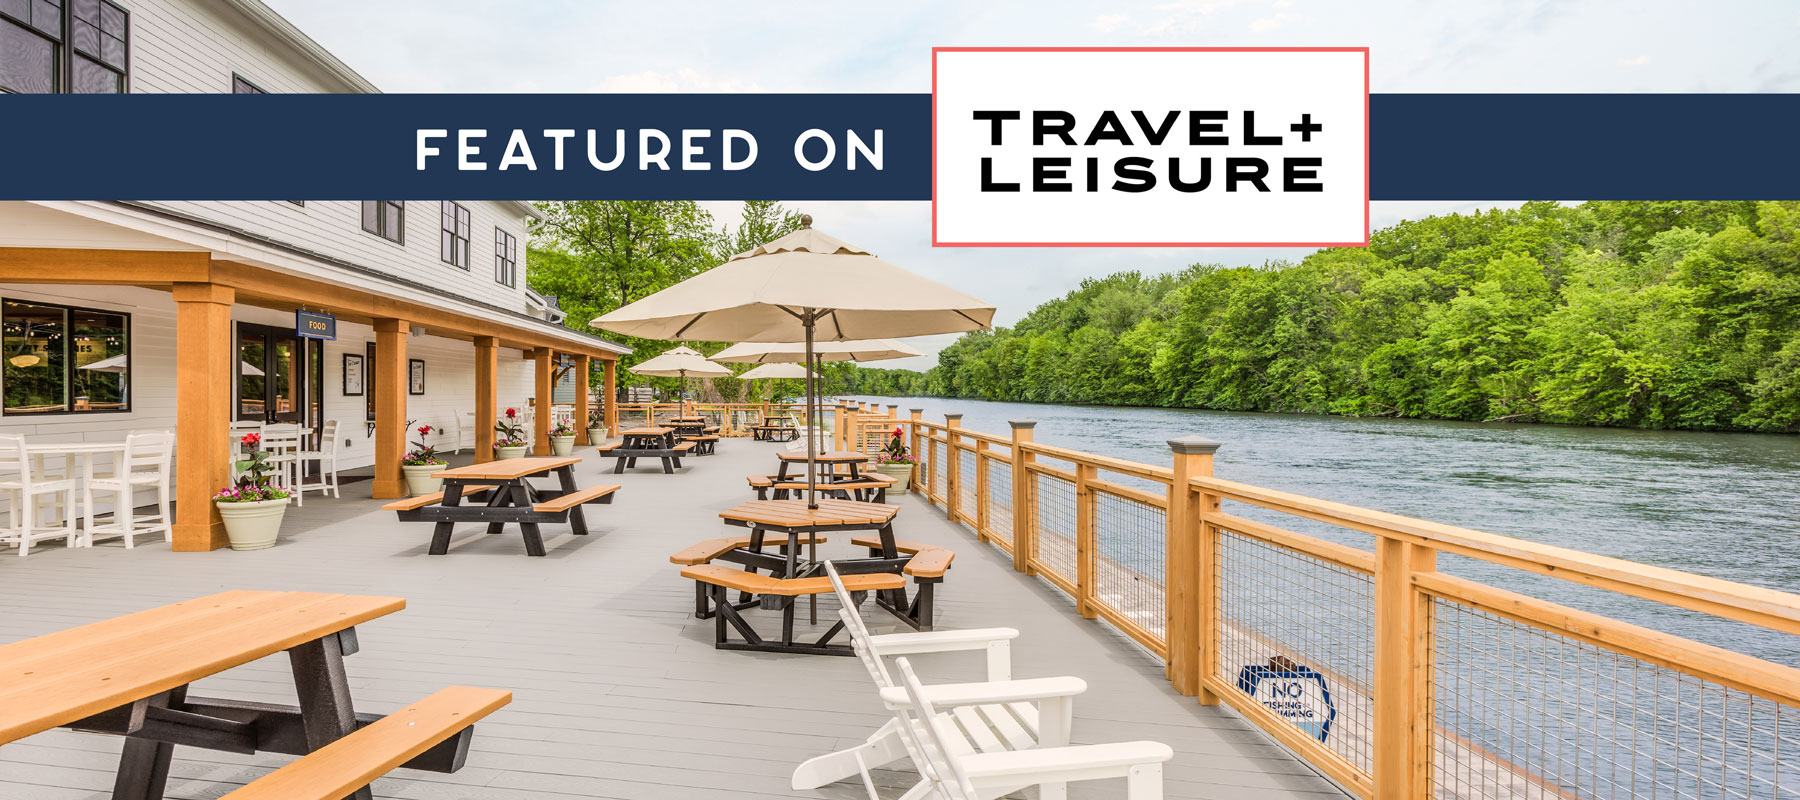 Featured on Travel+Leisure - Sylvan Beach Supply Co Exterior next to Oneida Lake in background